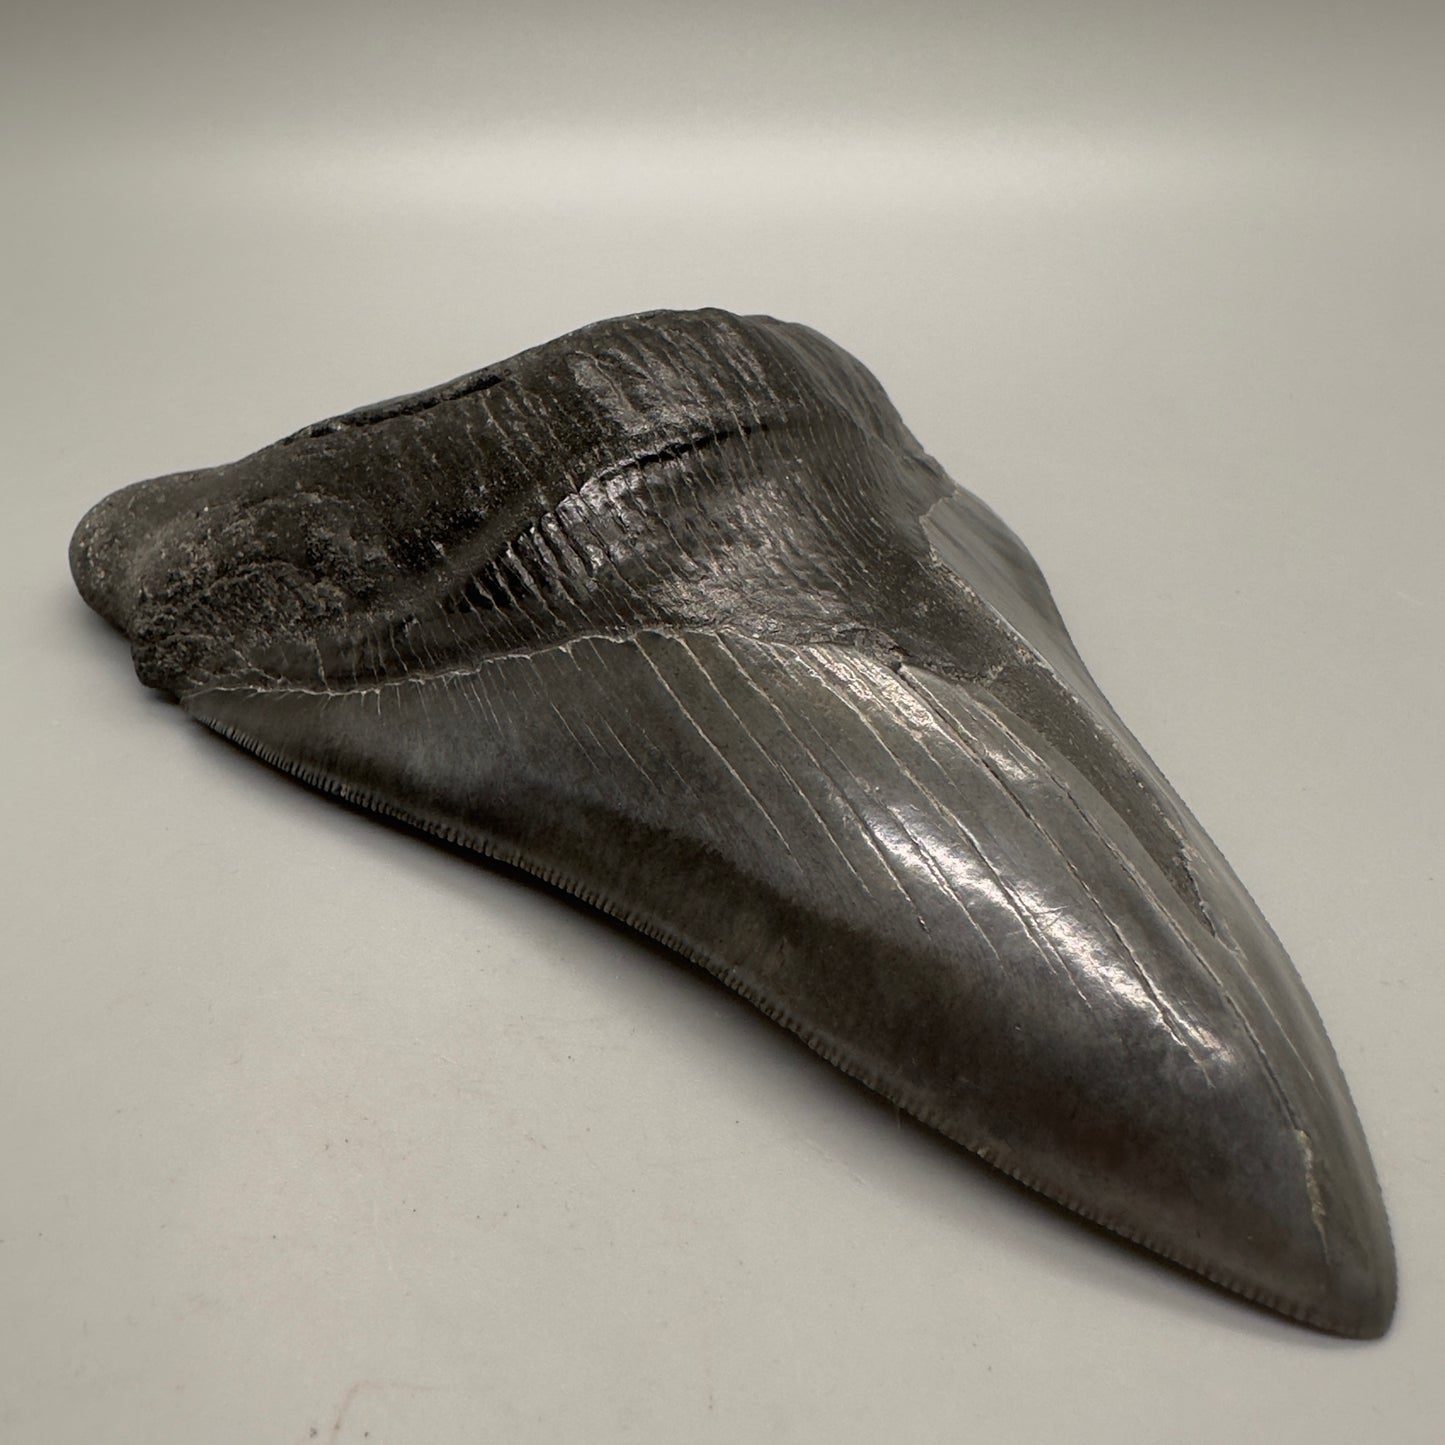 EXTRA LARGE 6.04" Fossil Megalodon Tooth: Scuba Diving, USA CM4633 - Front left